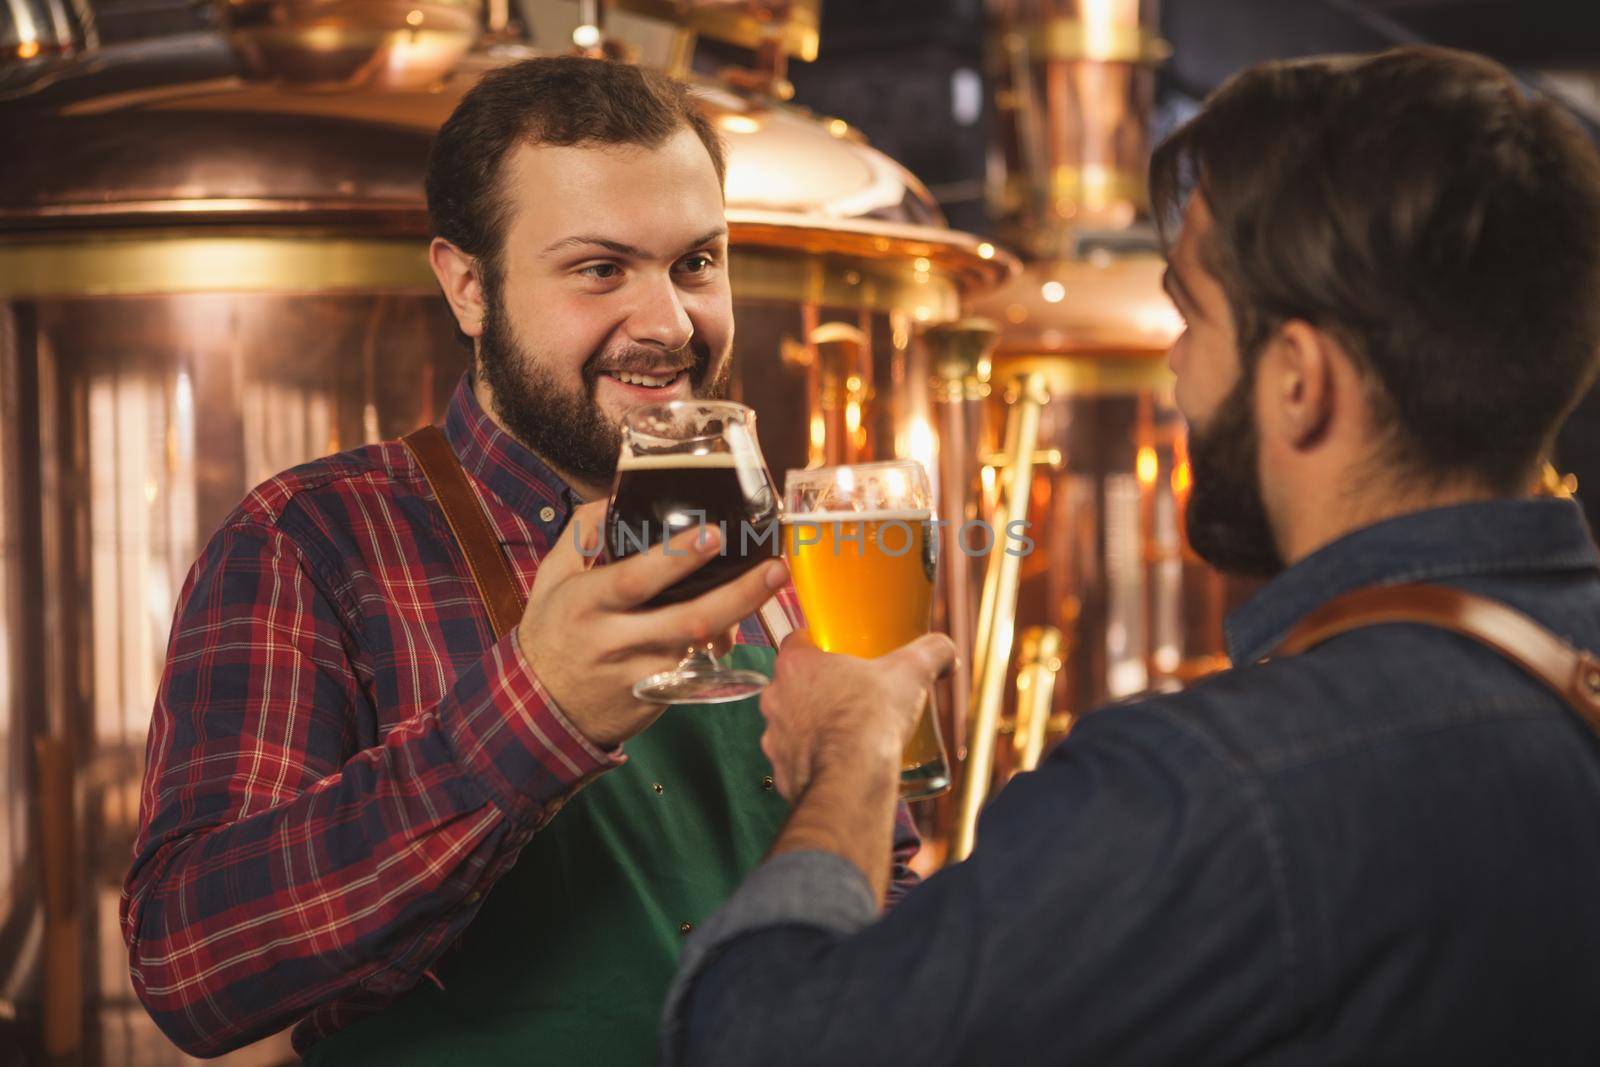 Bearded cheerful brewer talking to his assistant, working at the beer production production factory. Professional brewers clinking beer glasses, celebrating success. Small business, entrepreneurship concept